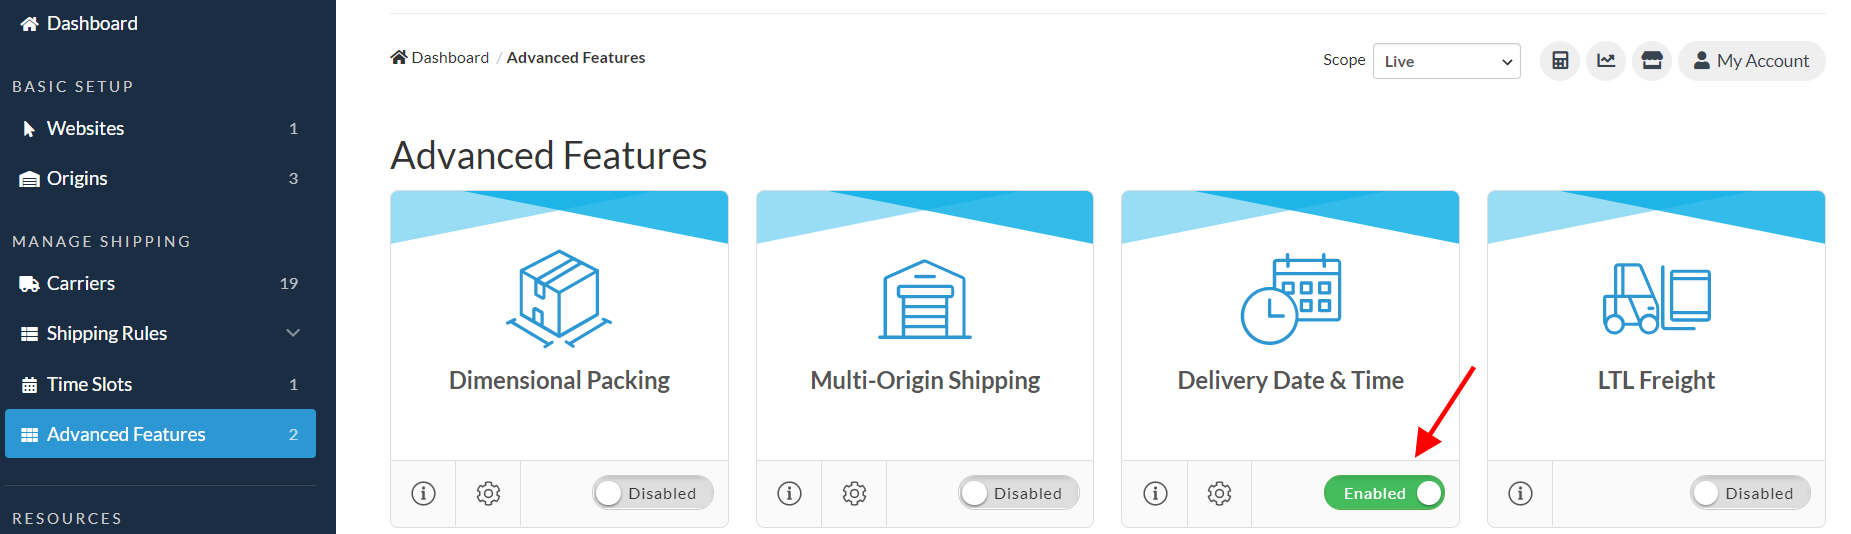 Find Delivery Date and Time advanced feature in ShipperHQ dashboard